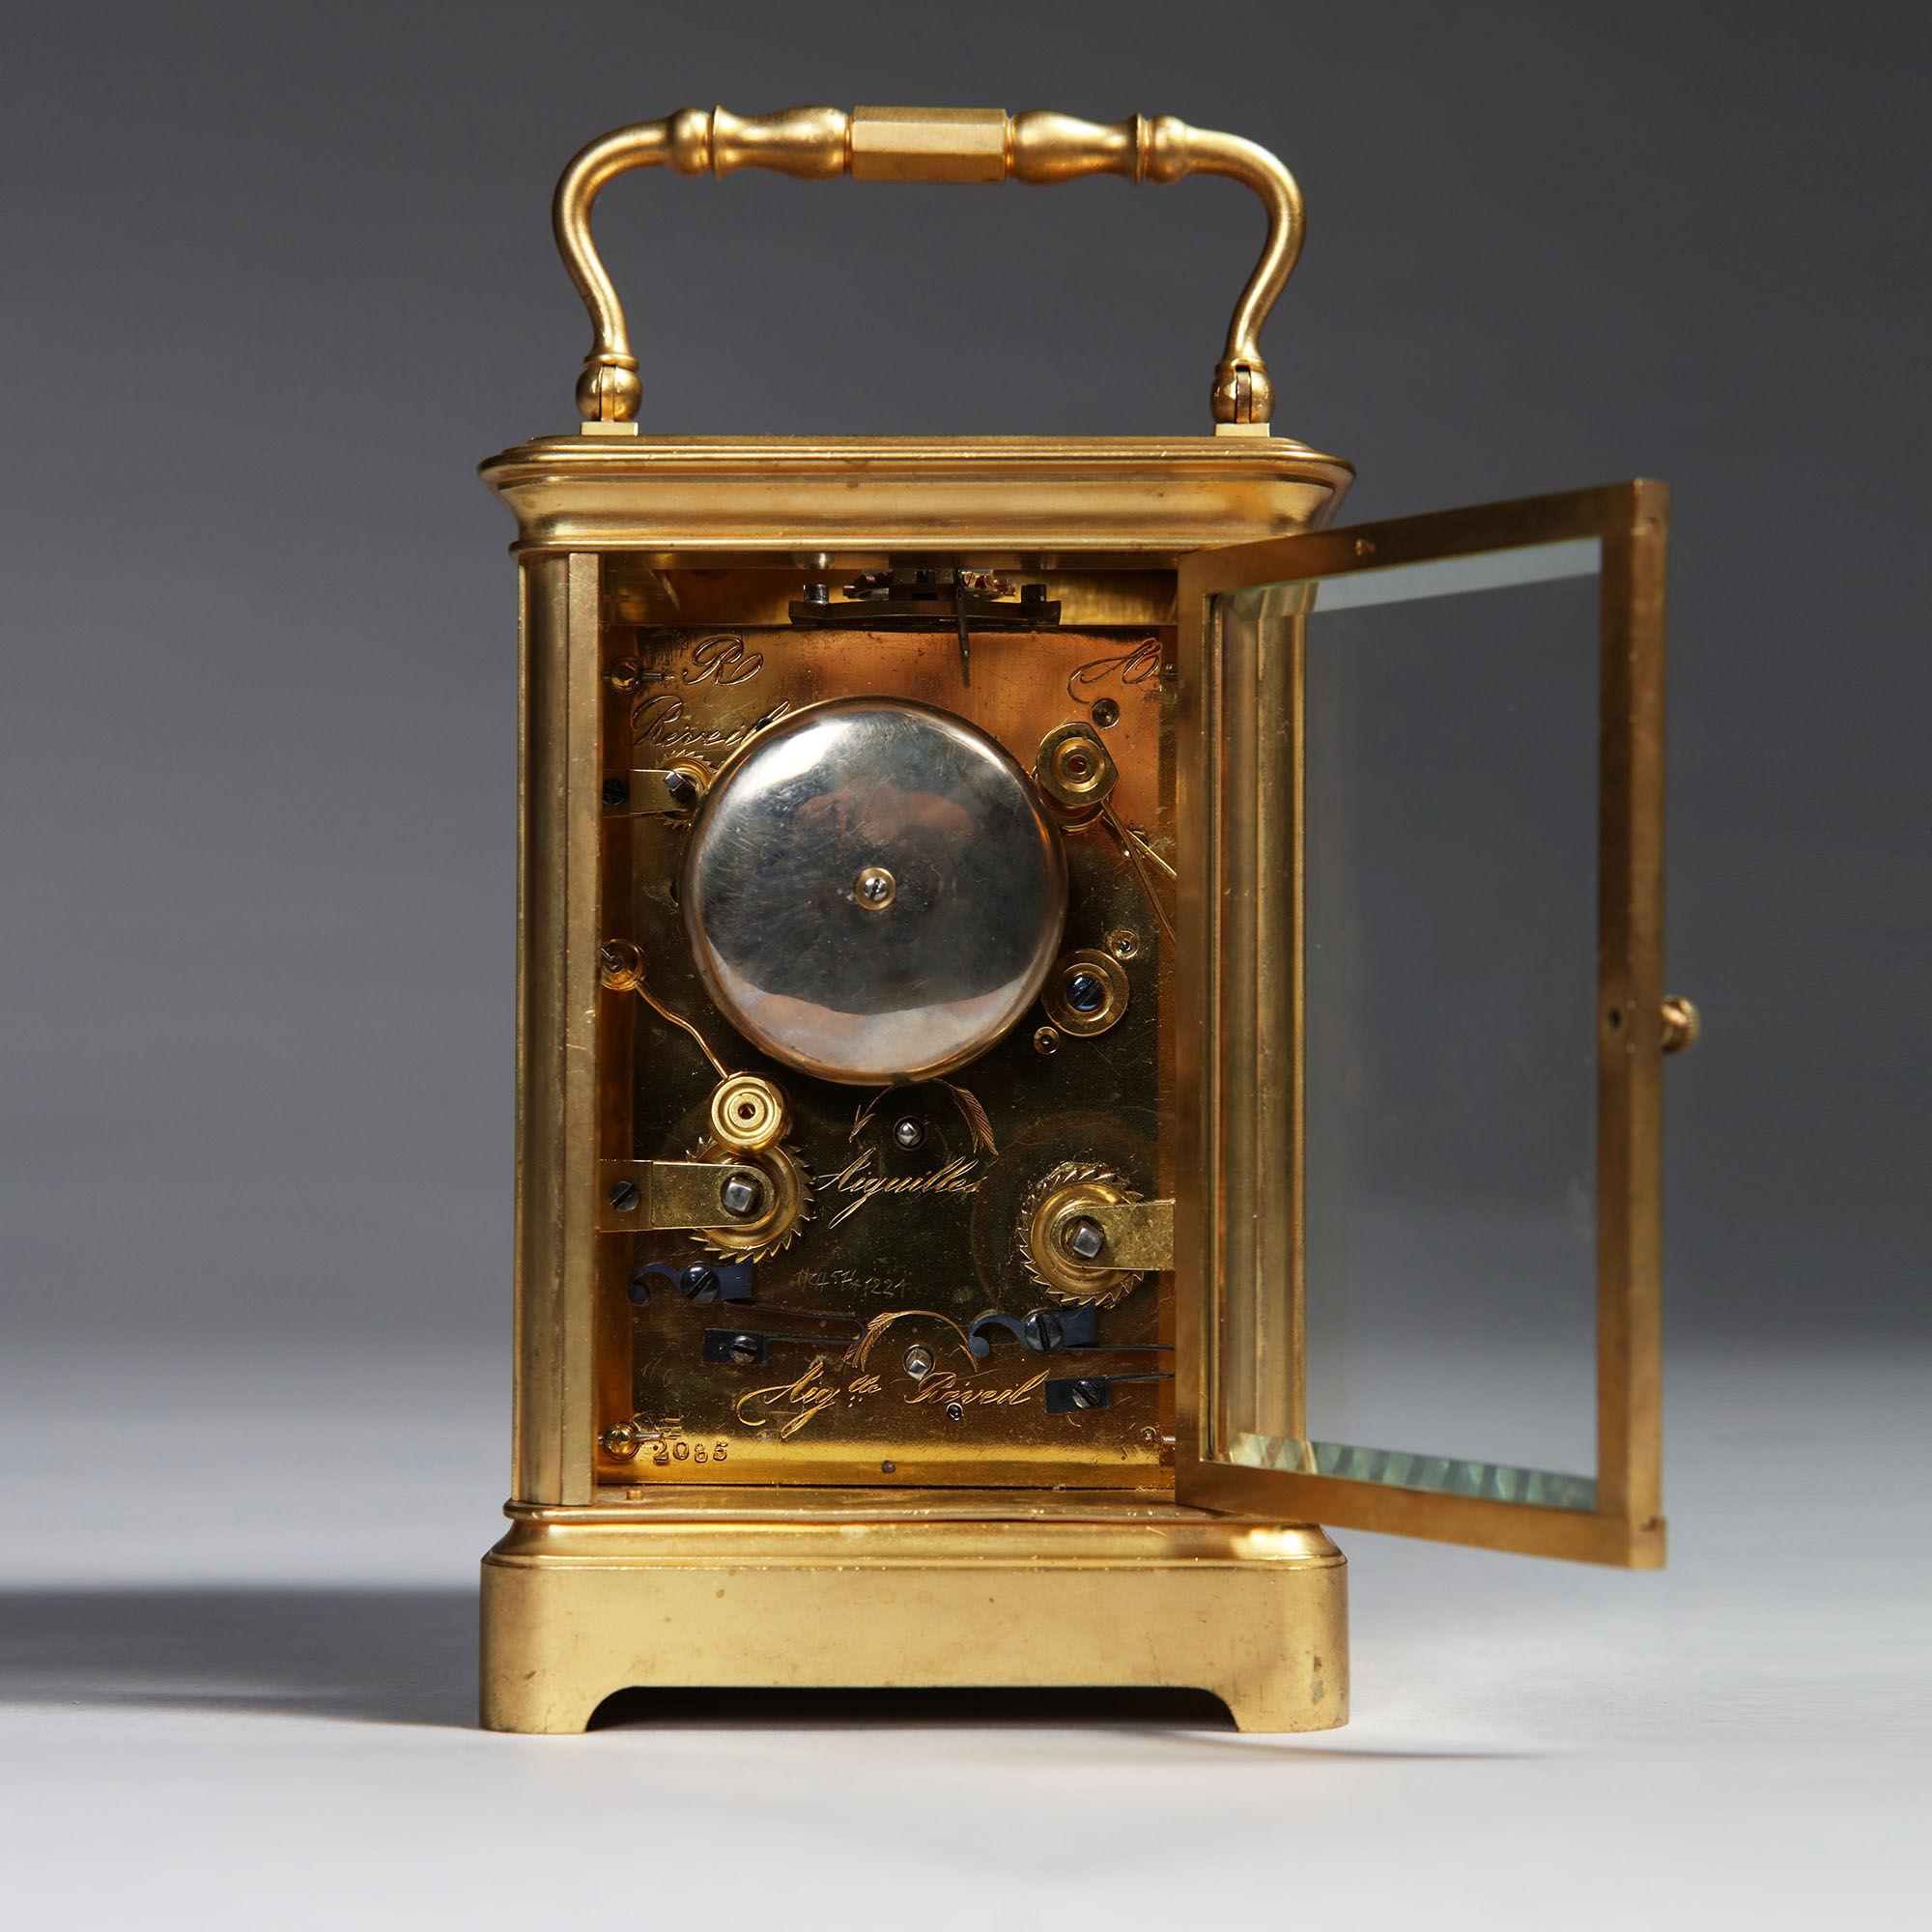 19th Century Quarter-Striking Carriage Clock by Leroy, Paris In Good Condition In Oxfordshire, United Kingdom